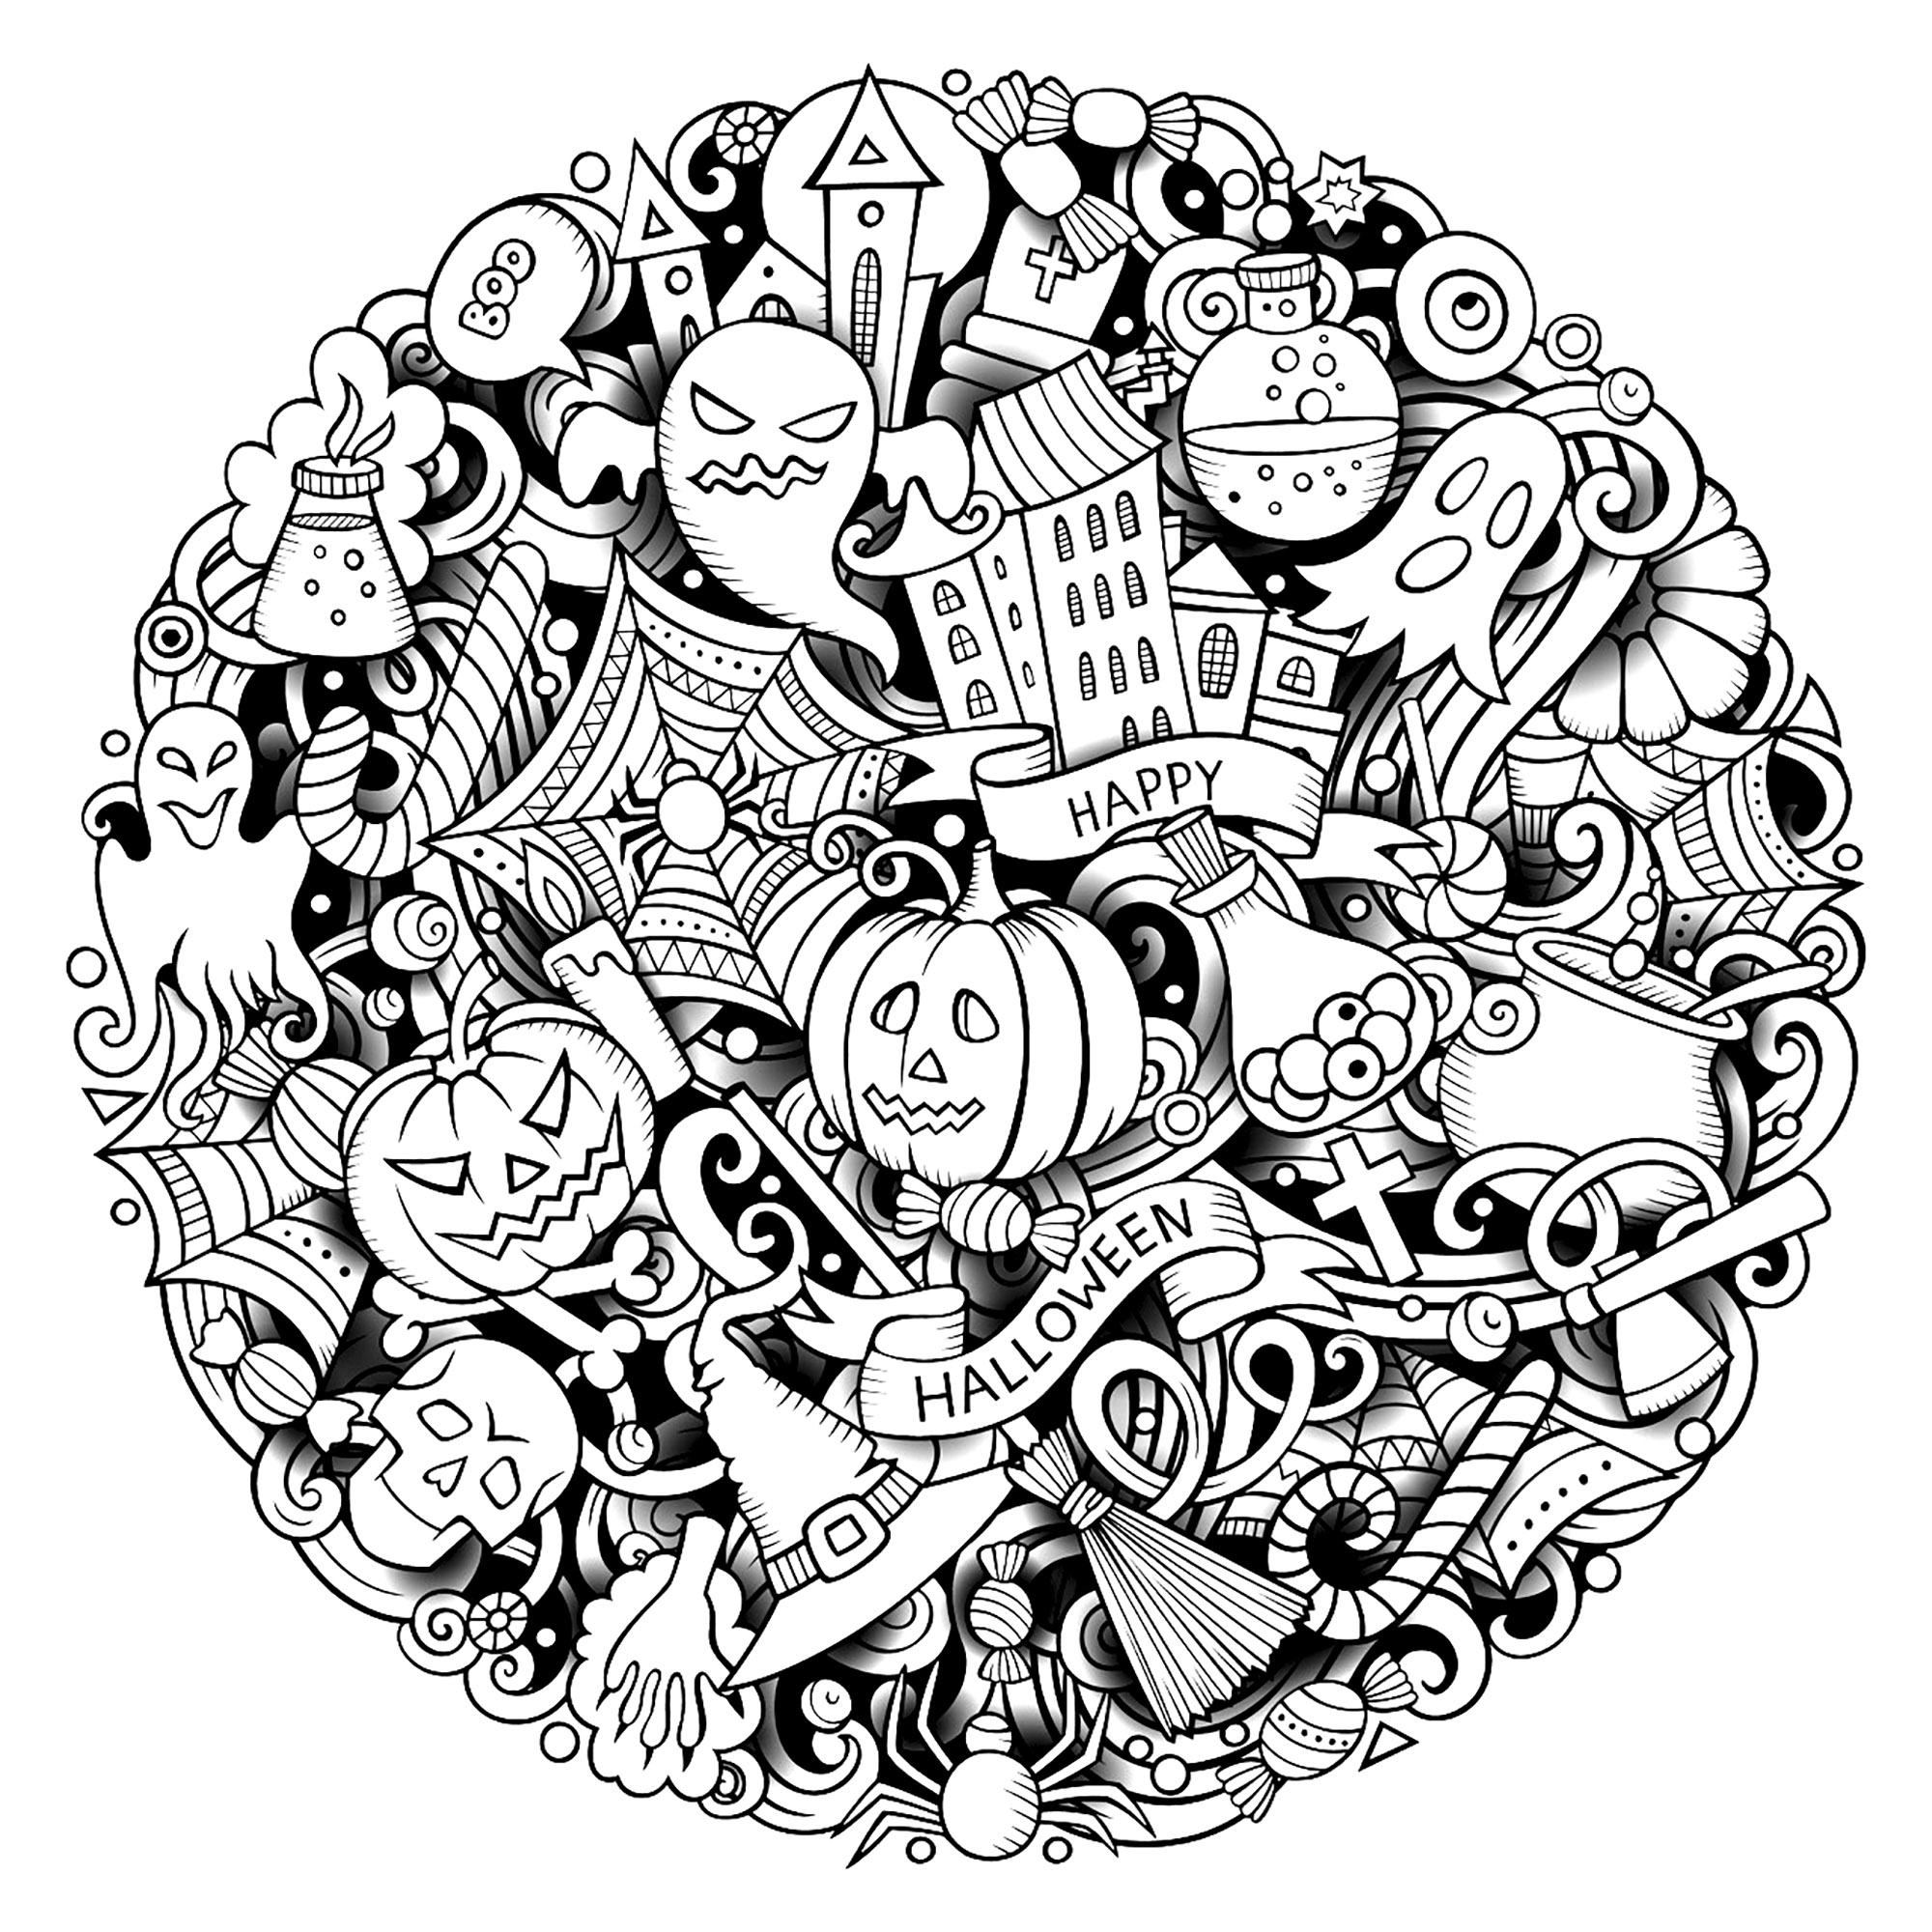 A complex Halloween Doodle. Various Halloween symbols and characters in a circular Doodle (pumpkins, ghosts, skeletons, spiders, etc.), Source : 123rf   Artist : Balabolka